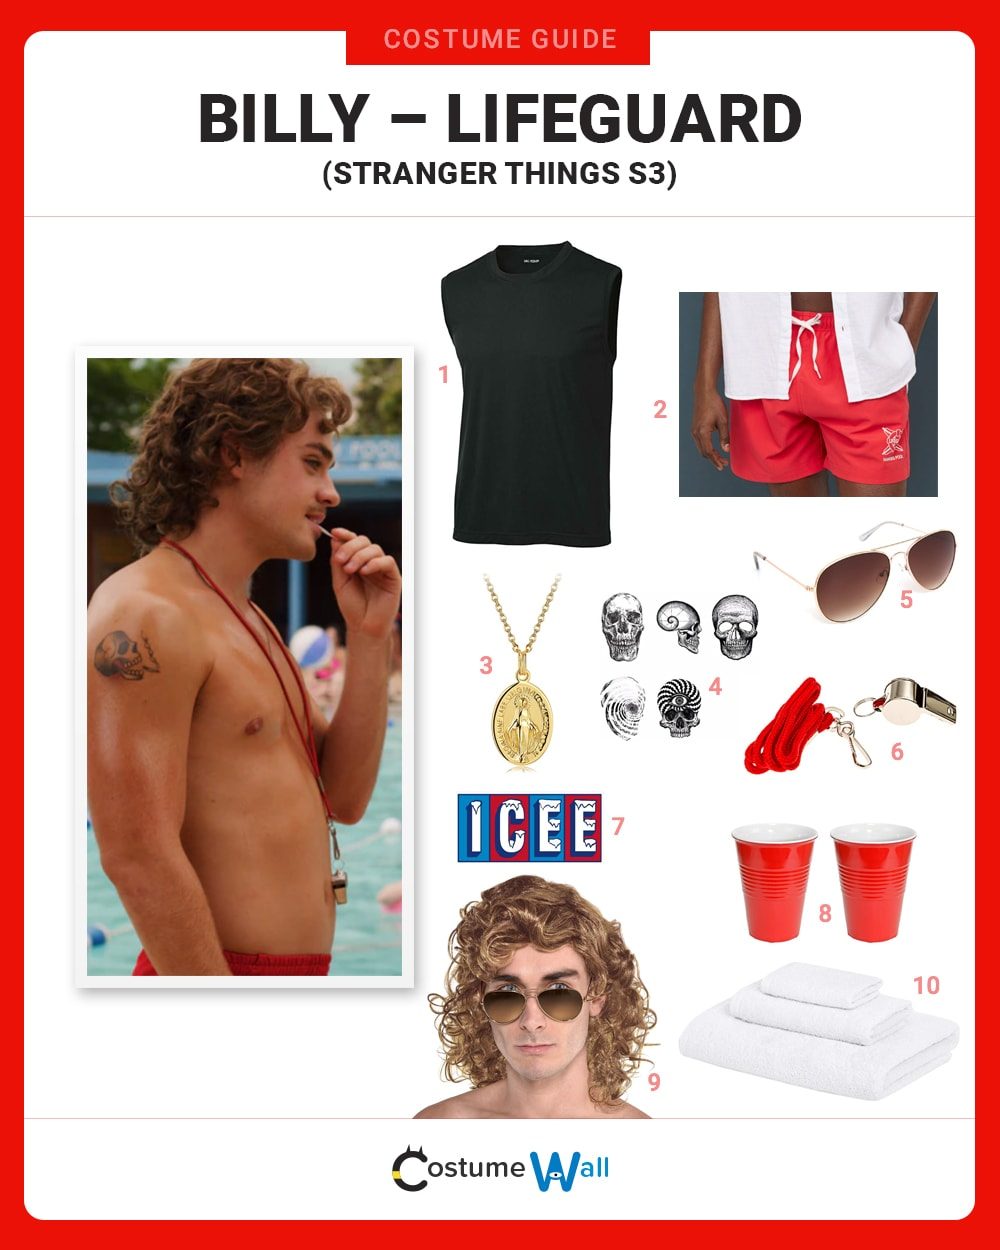 Billy - Lifeguard Costume Guide